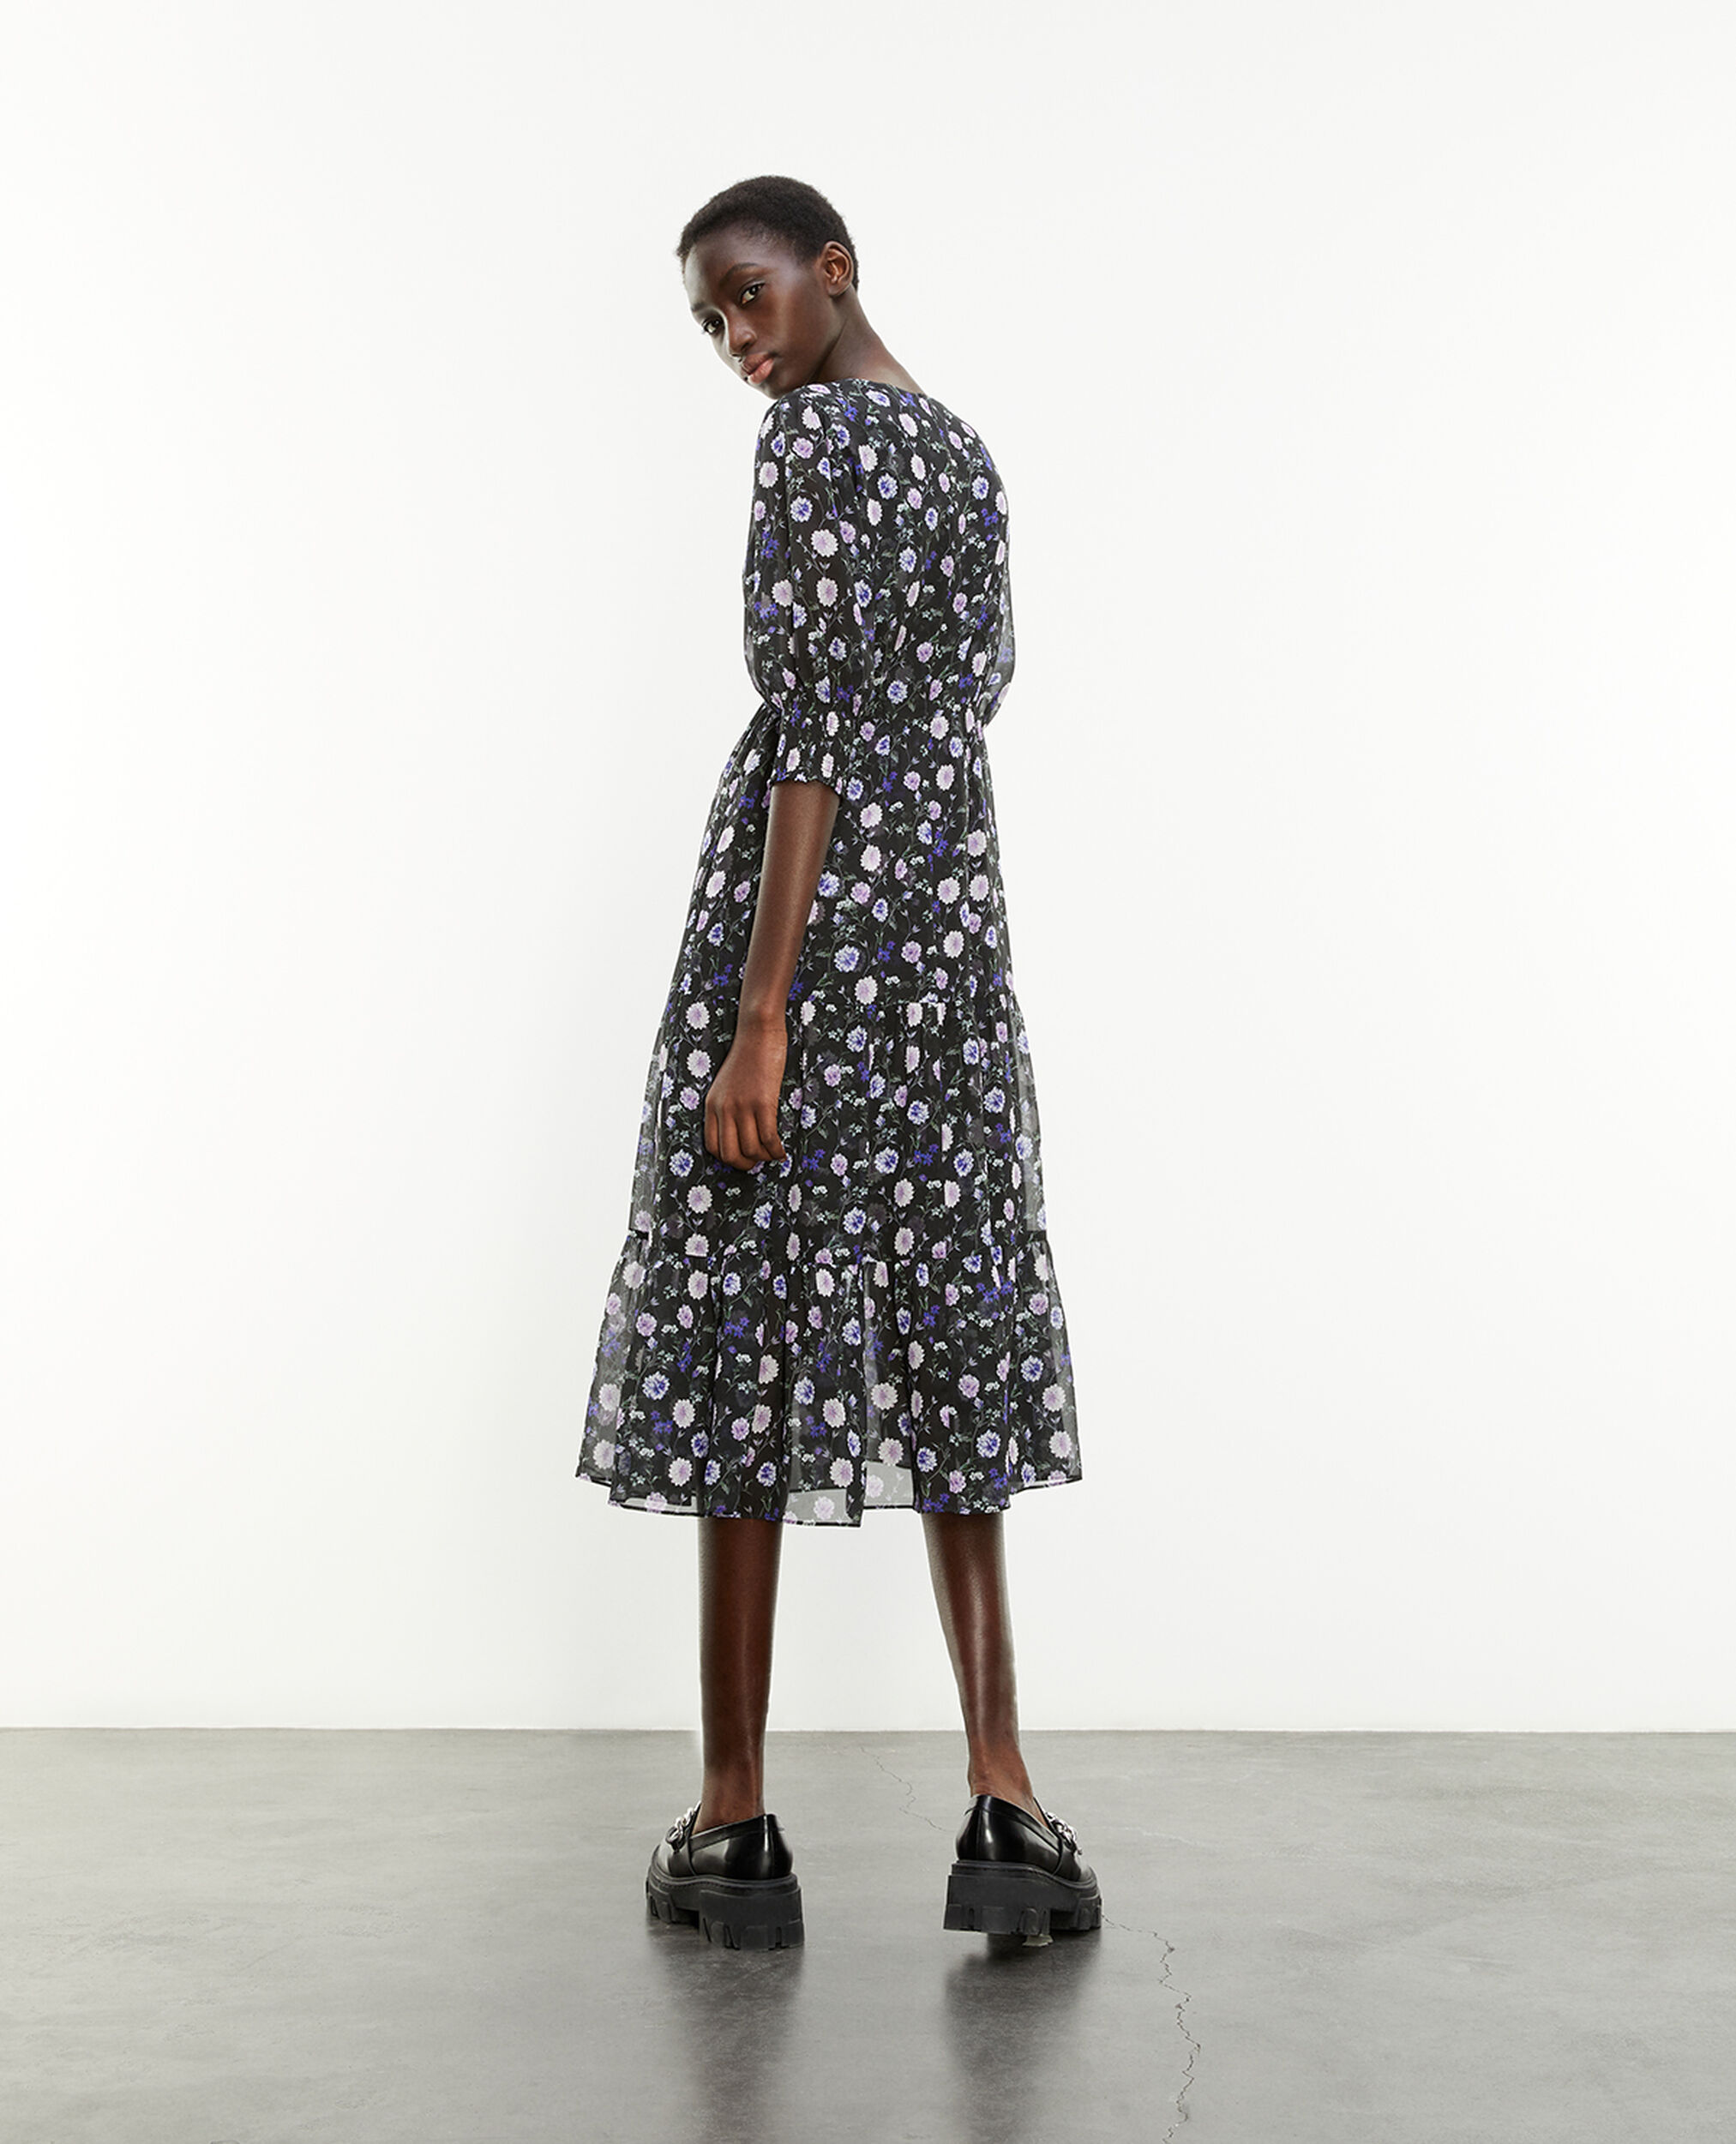 Buttoned printed midi dress with frills, BLACK-PURPLE, hi-res image number null